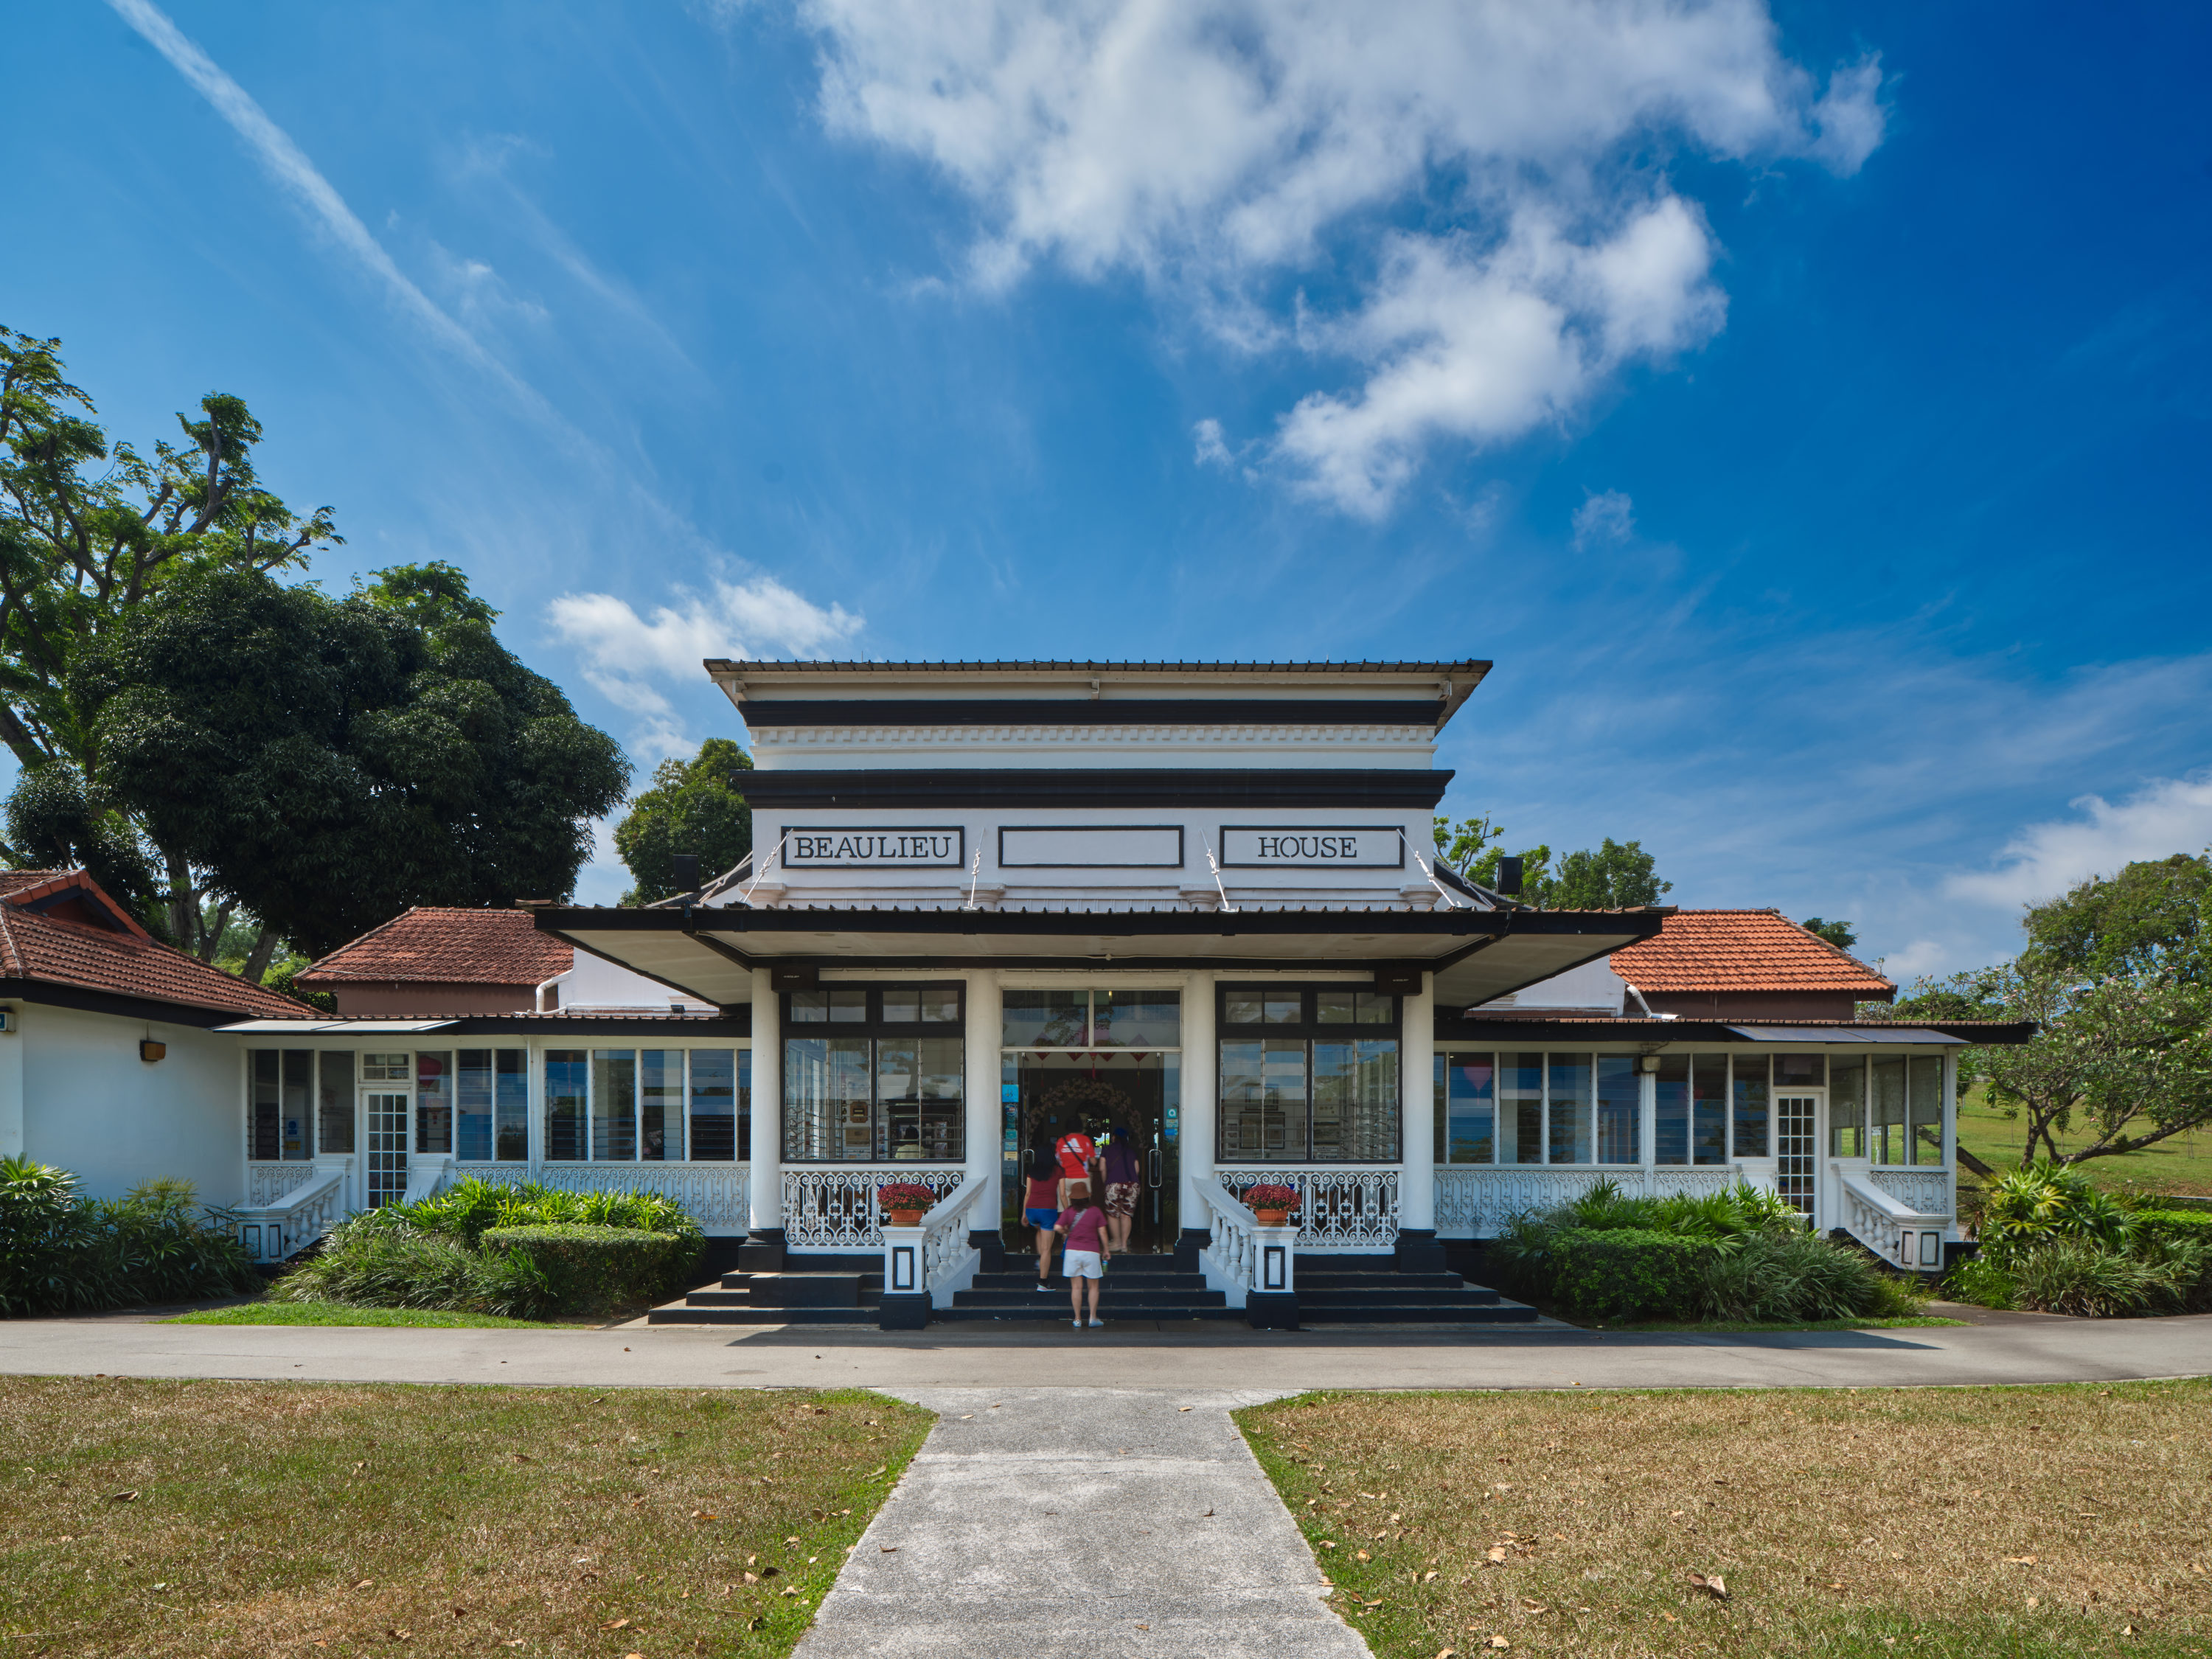 Discover-Singapore's-Naval-History-Sembawang-Heritage-Trail